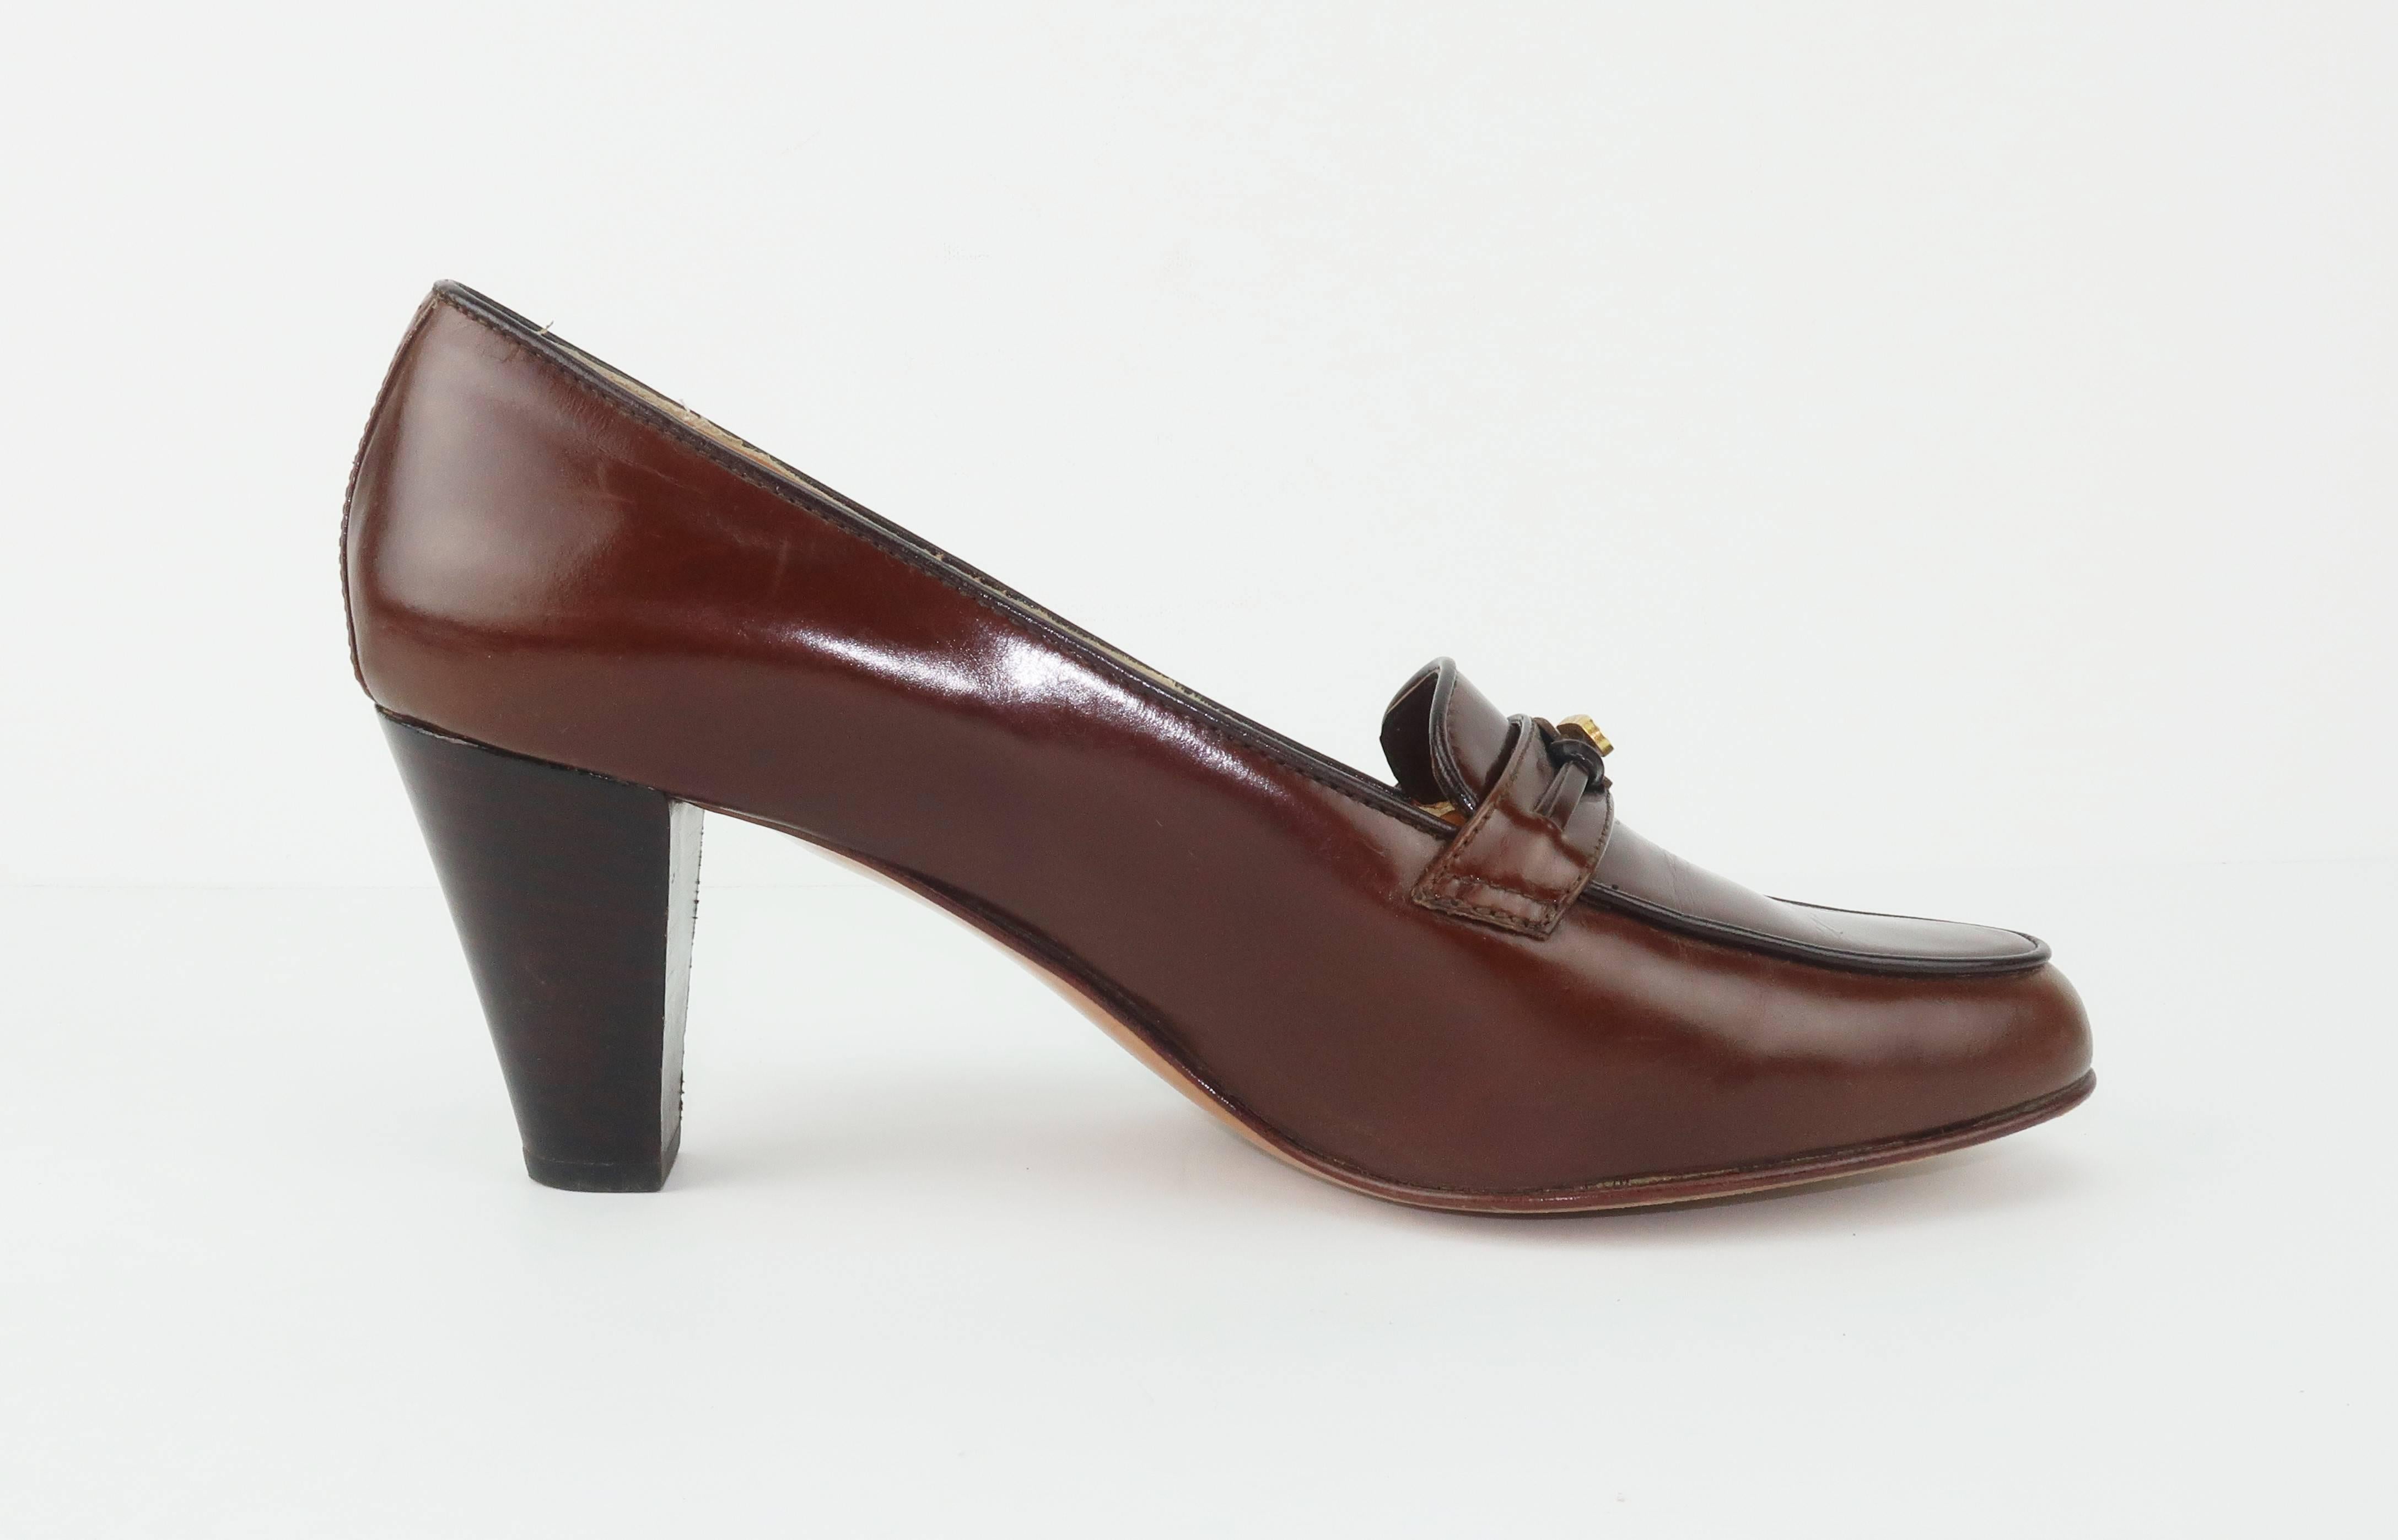 Women's Preppy 1970's Gucci Brown Leather Heeled Loafers 37 1/2 B